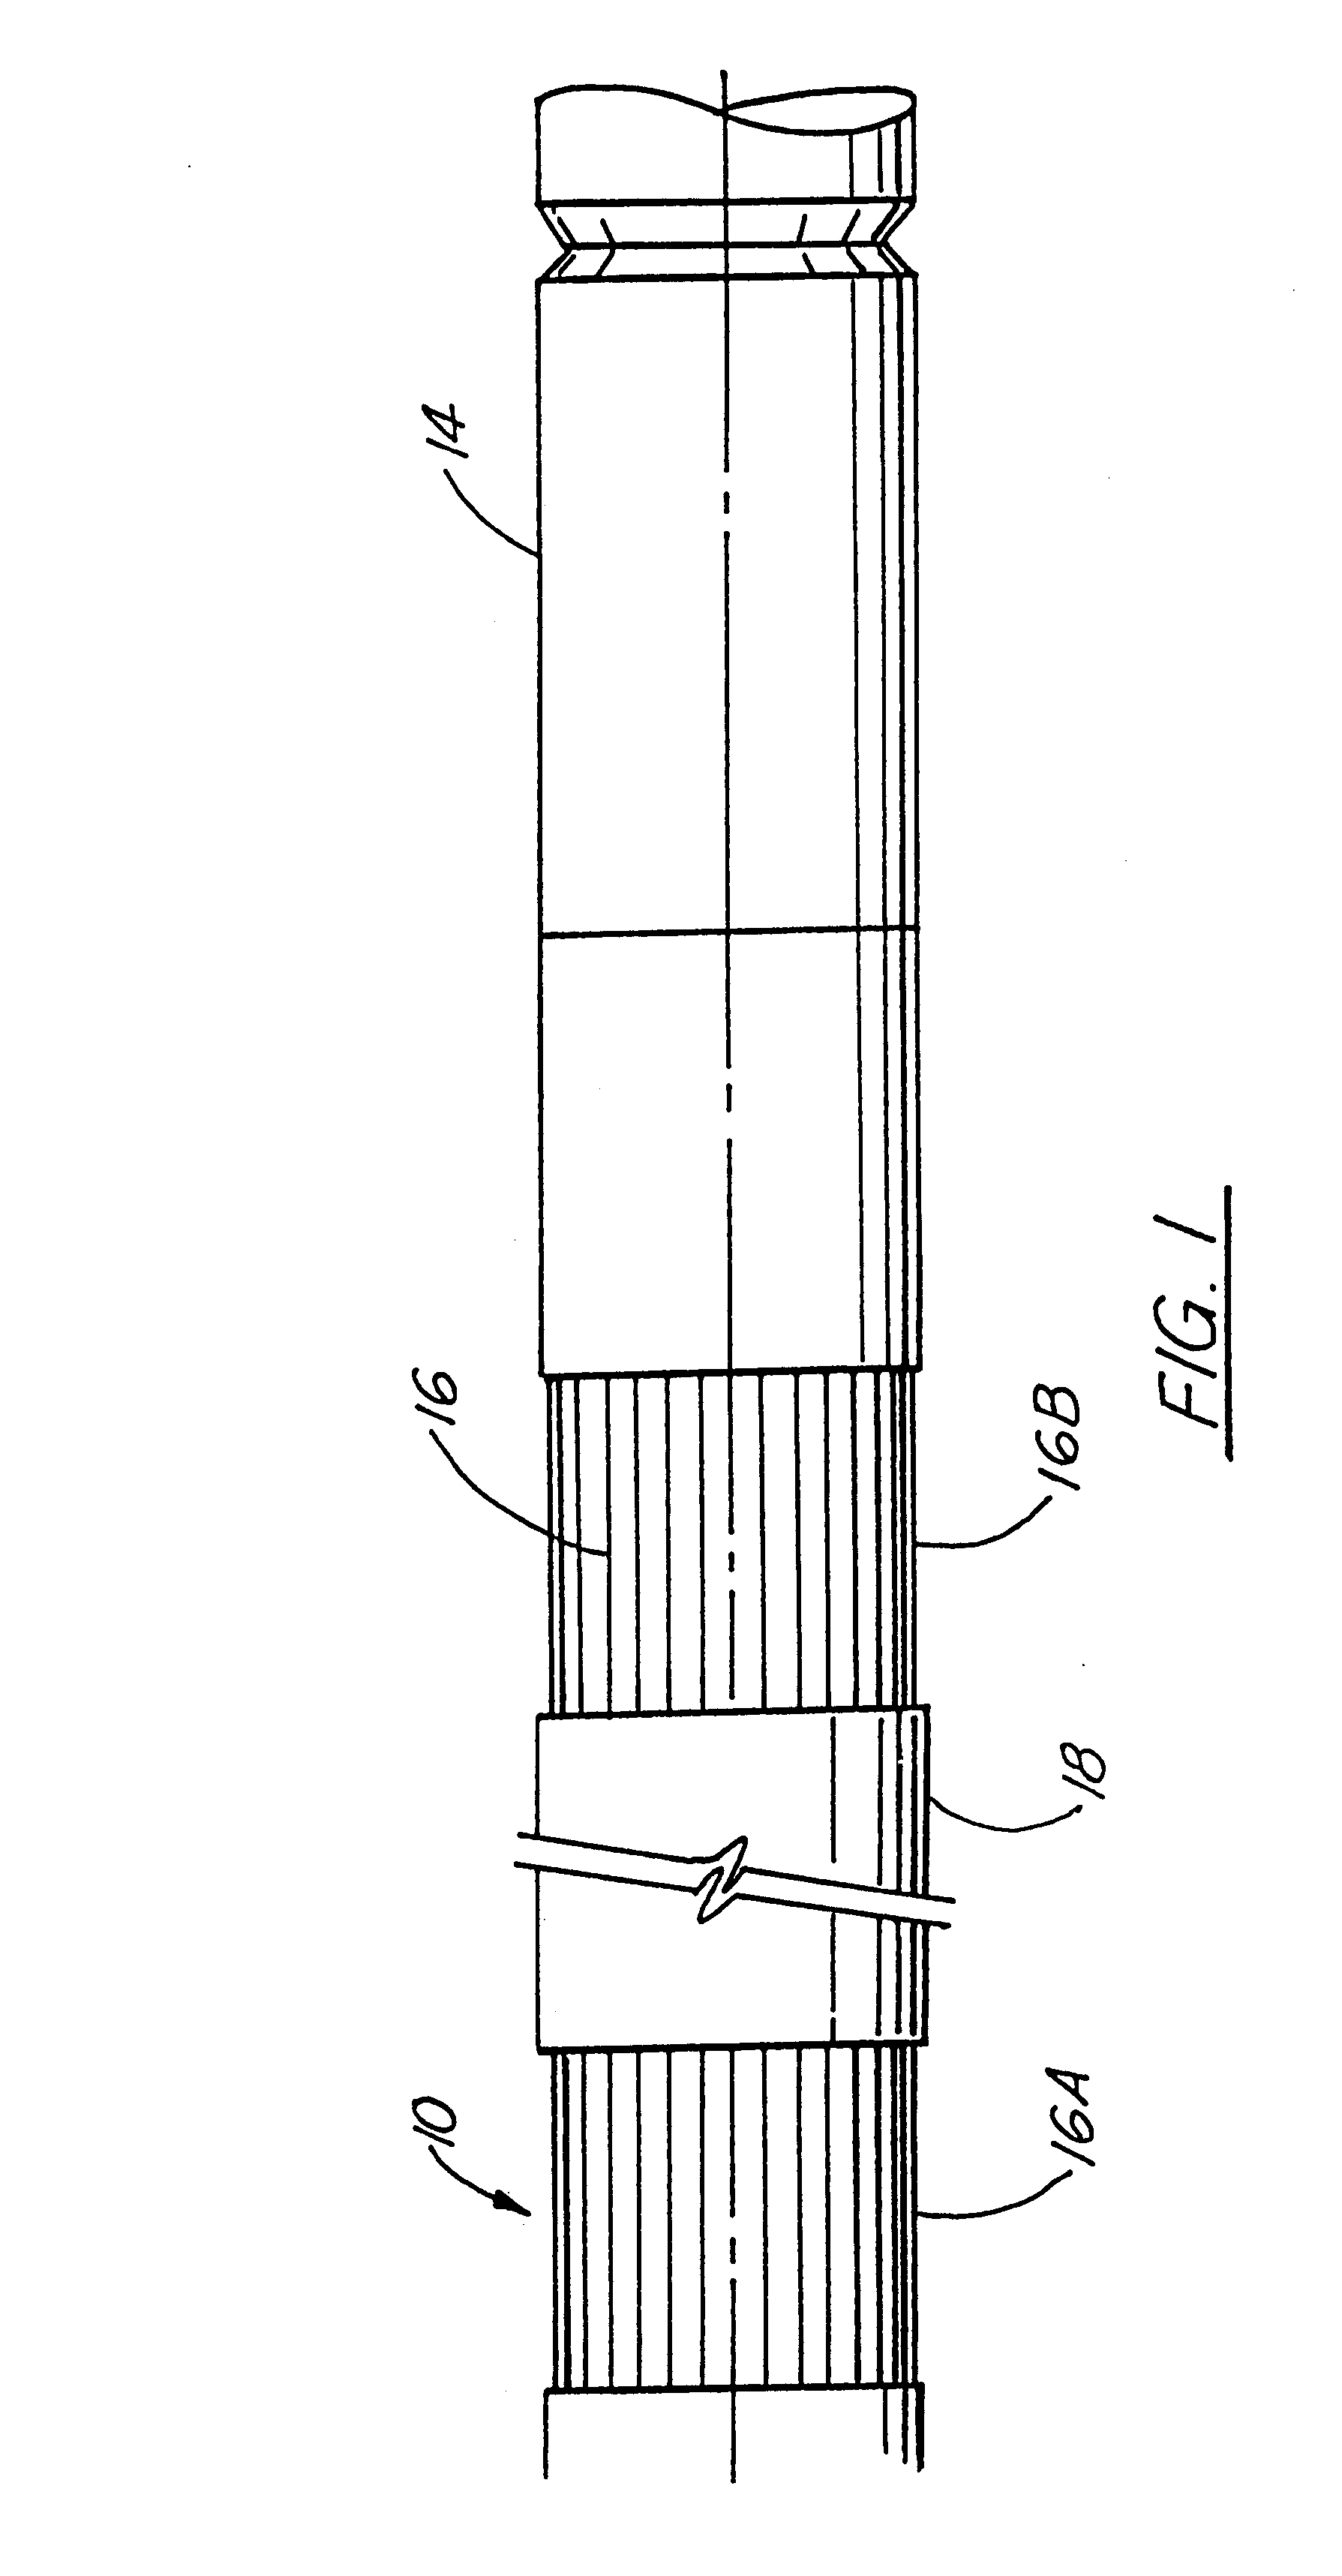 Apparatus and method for maintaining relatively uniform fluid pressure within an expandable well tool subjected to thermal variants